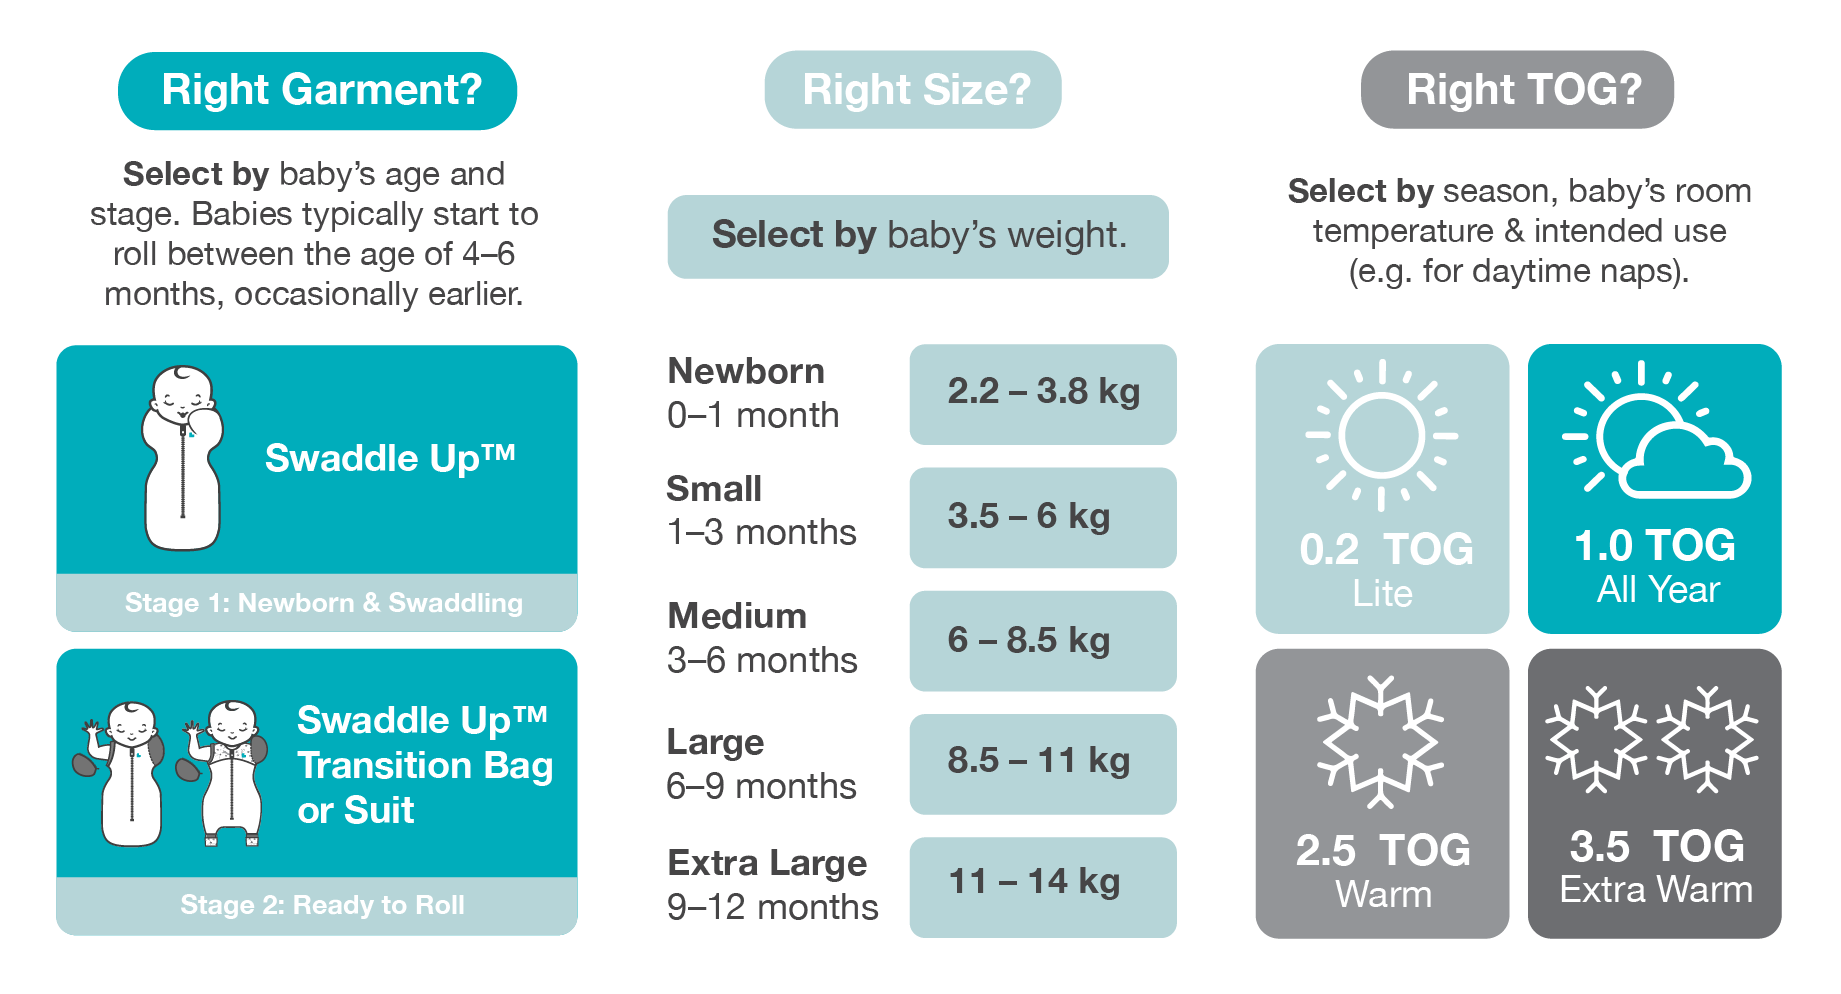 Love to Dream NZ - Choosing the right swaddle. Have you got the right garment? The right size? And the right TOG? Our guide will show you how to get this right.